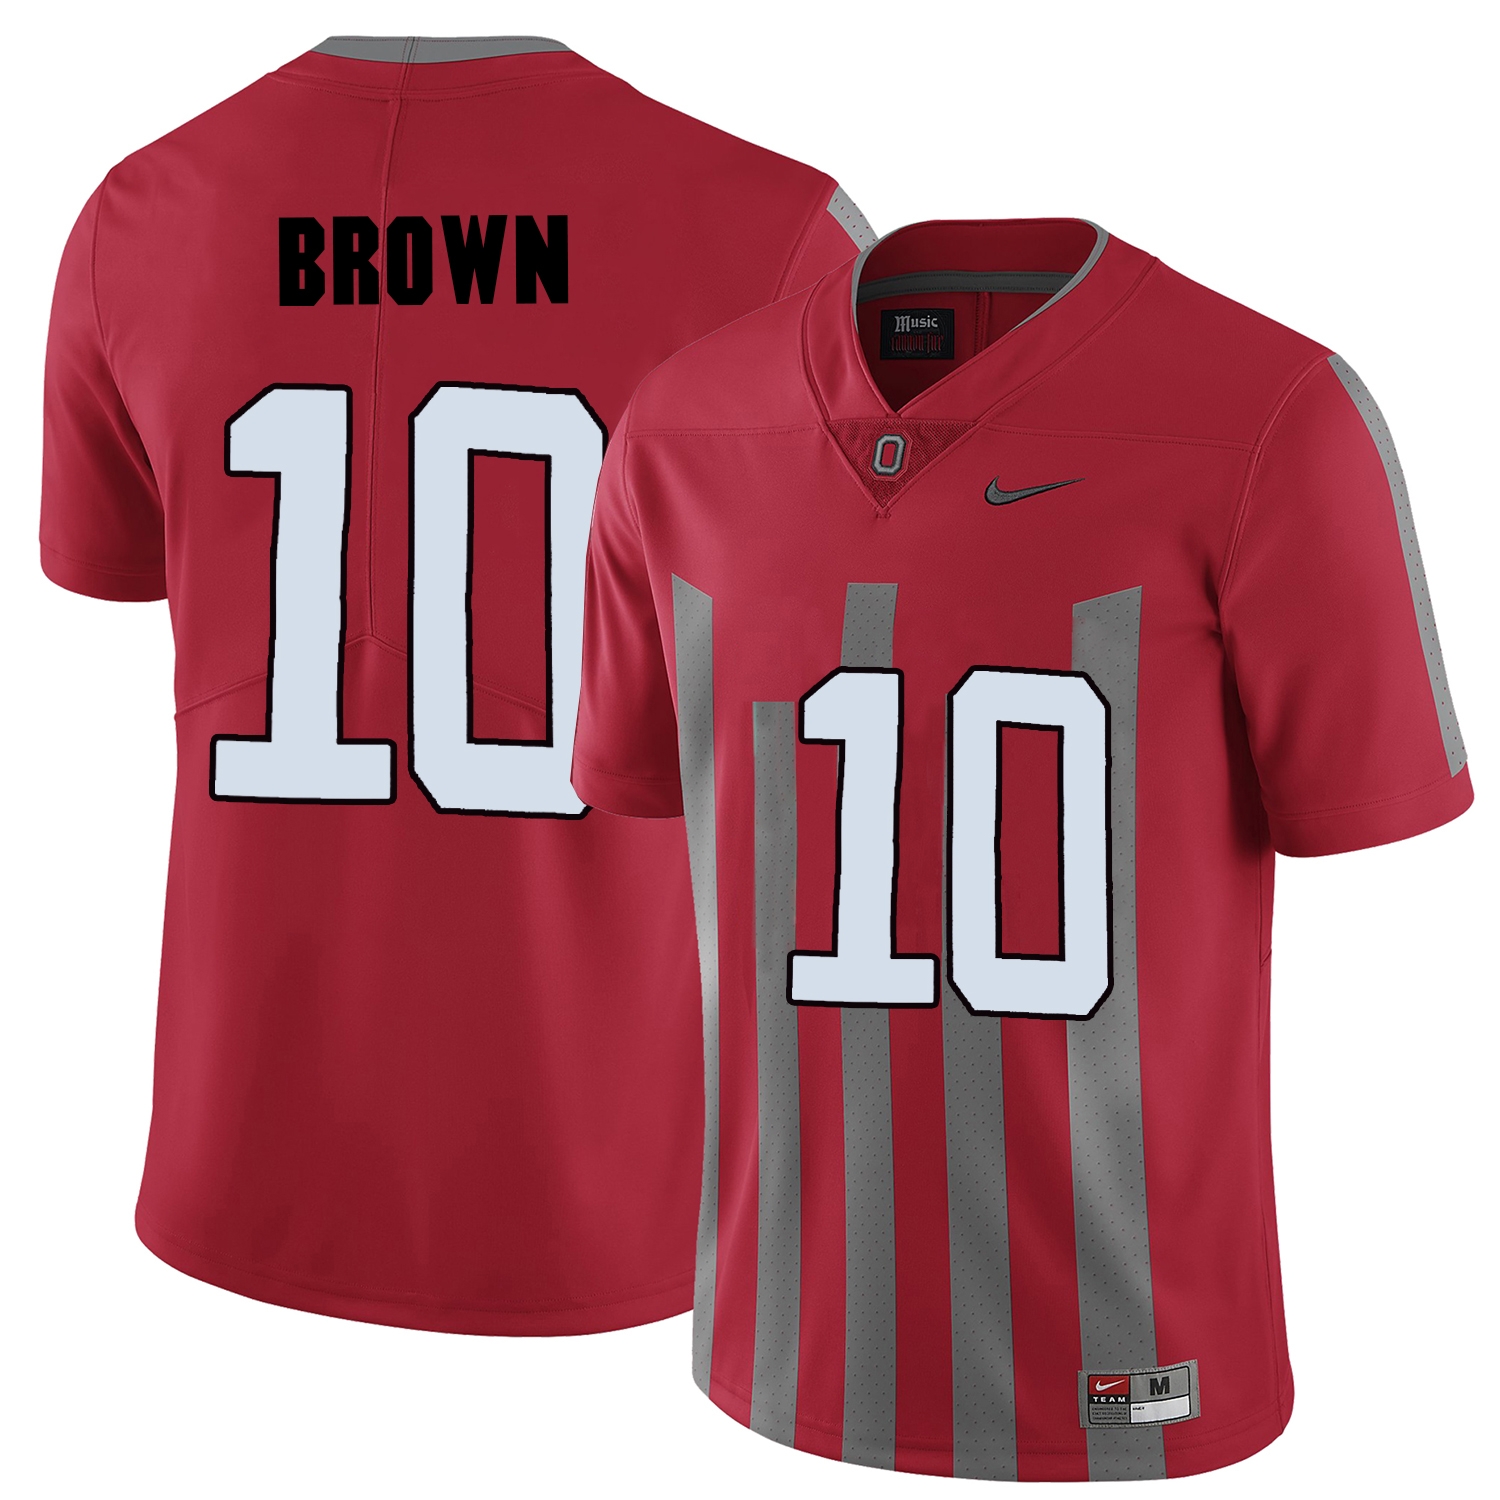 Ohio State Buckeyes Men's NCAA CaCorey Brown #10 Red Elite College Football Jersey HJY0049RM